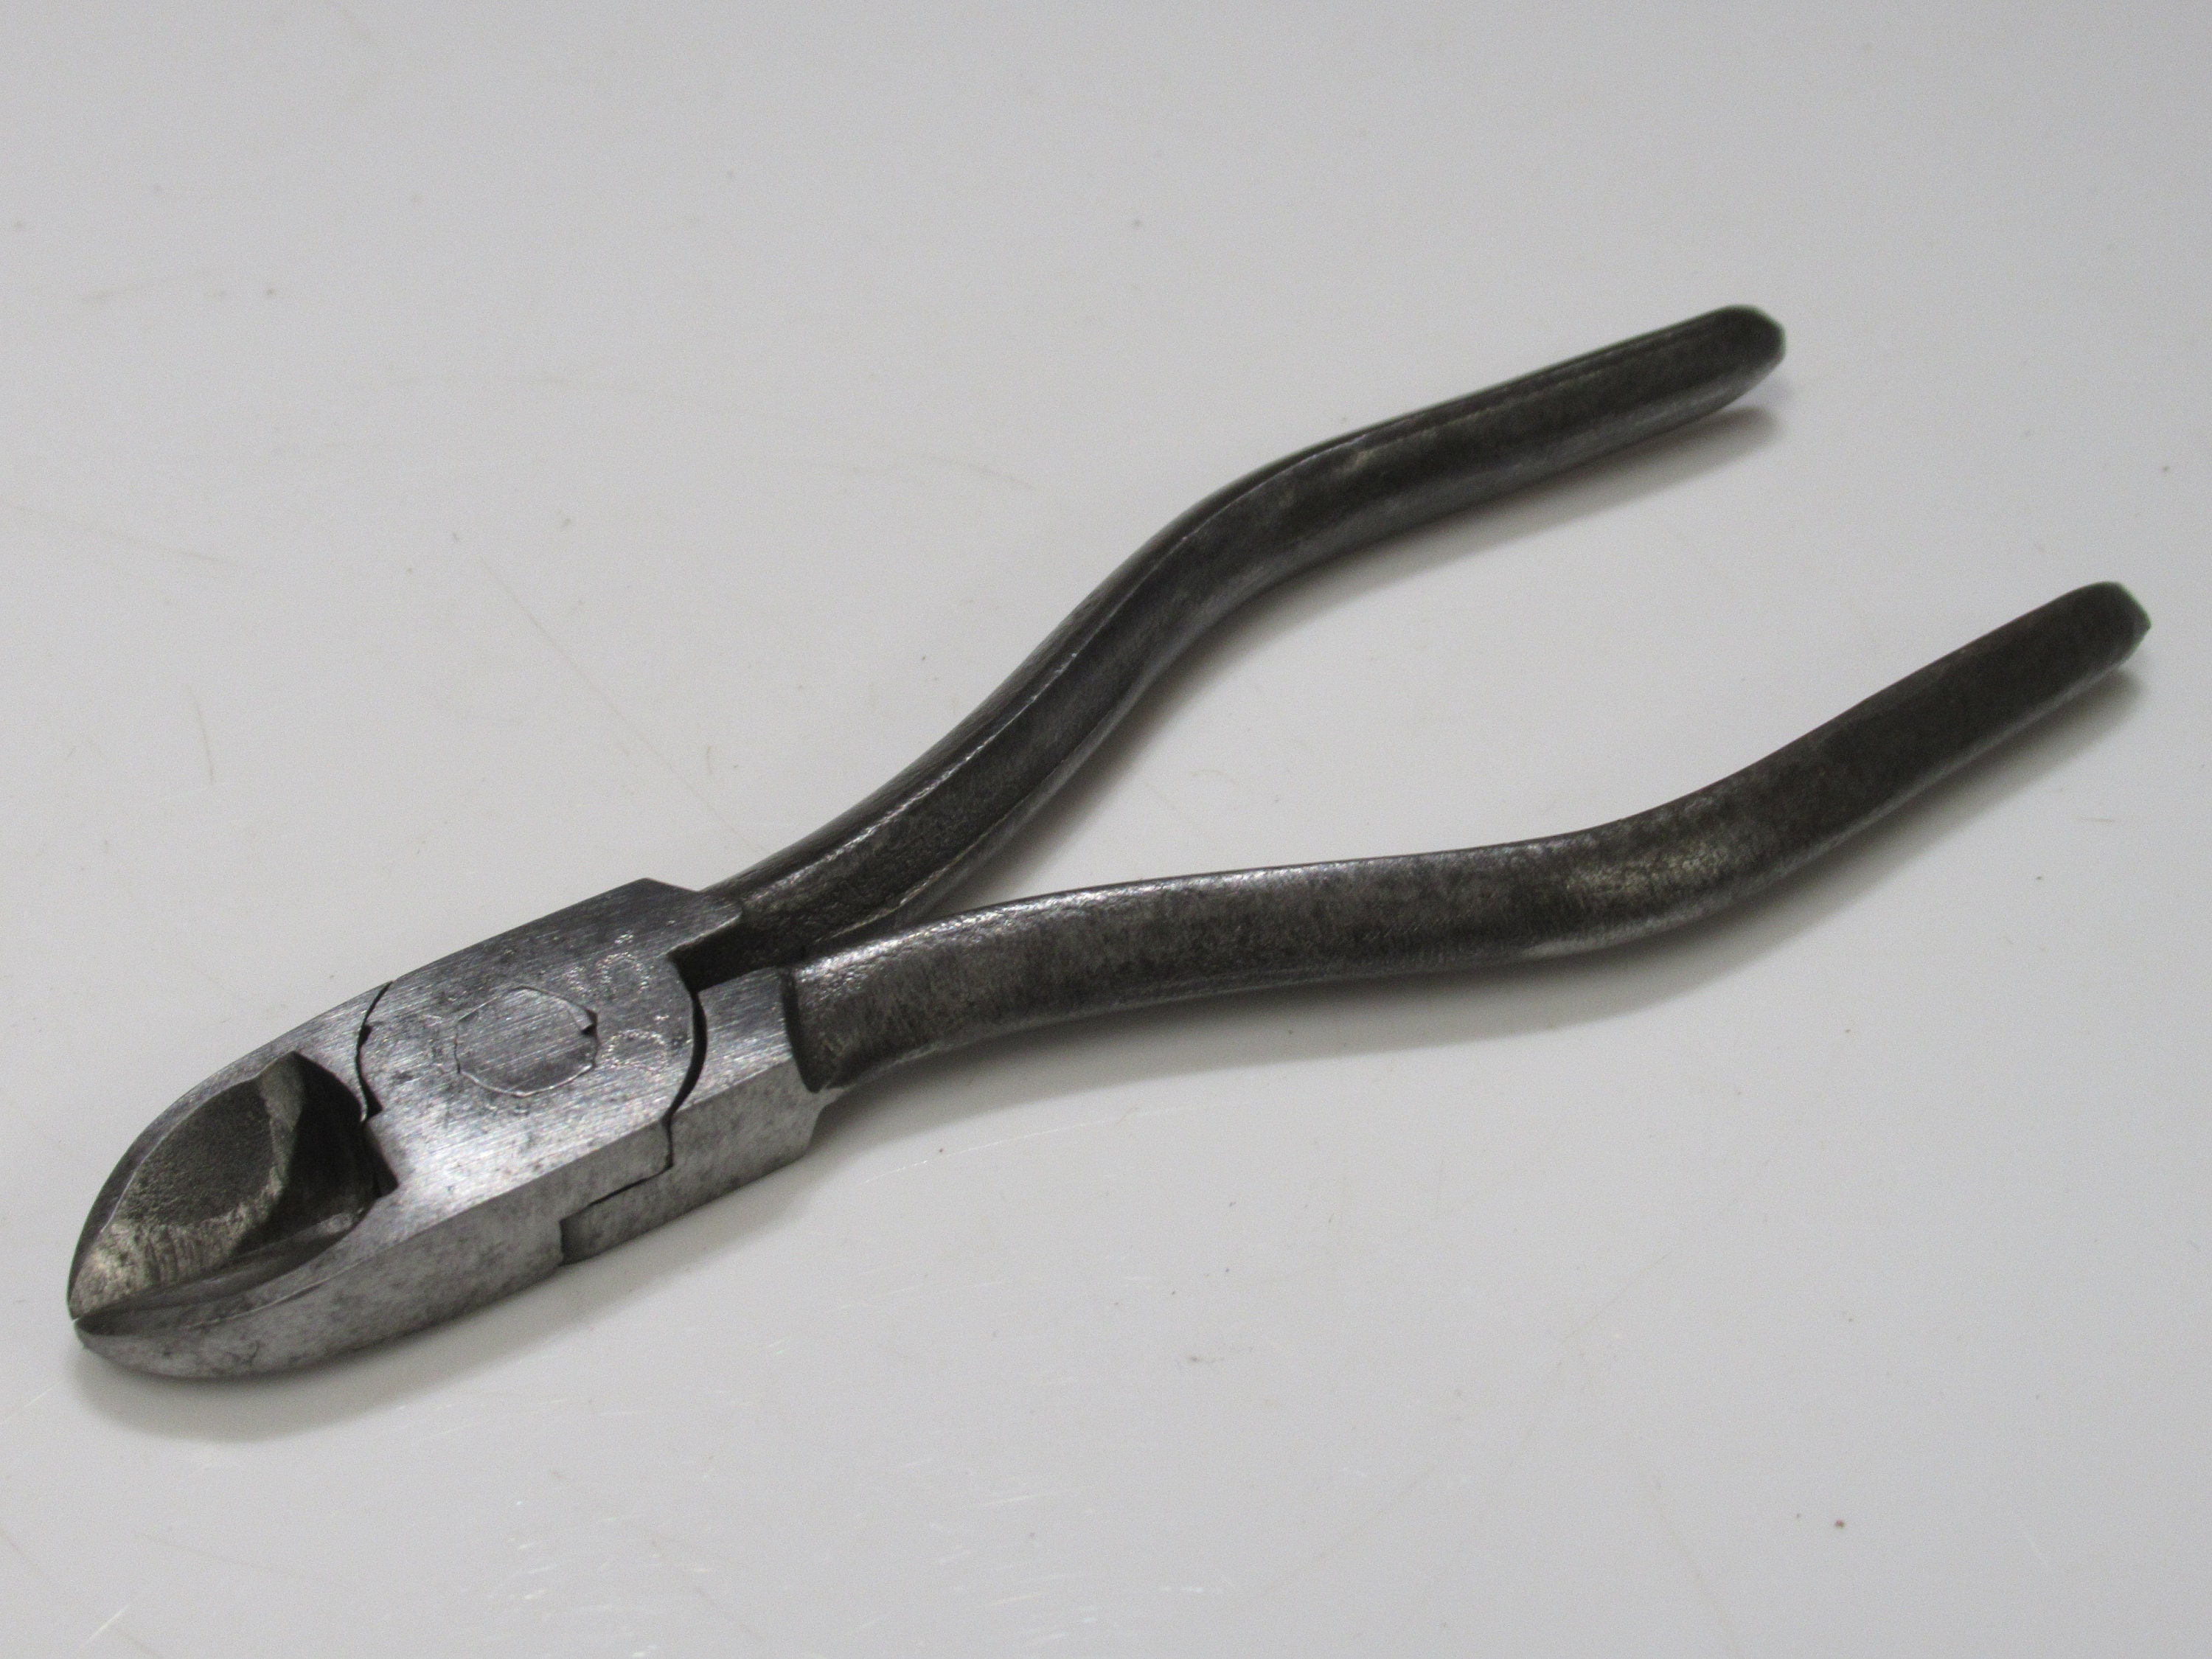 VINTAGE SMALL WIRE CUTTERS JEWELER'S SNIPPERS CUTTER TOOL DP A AL